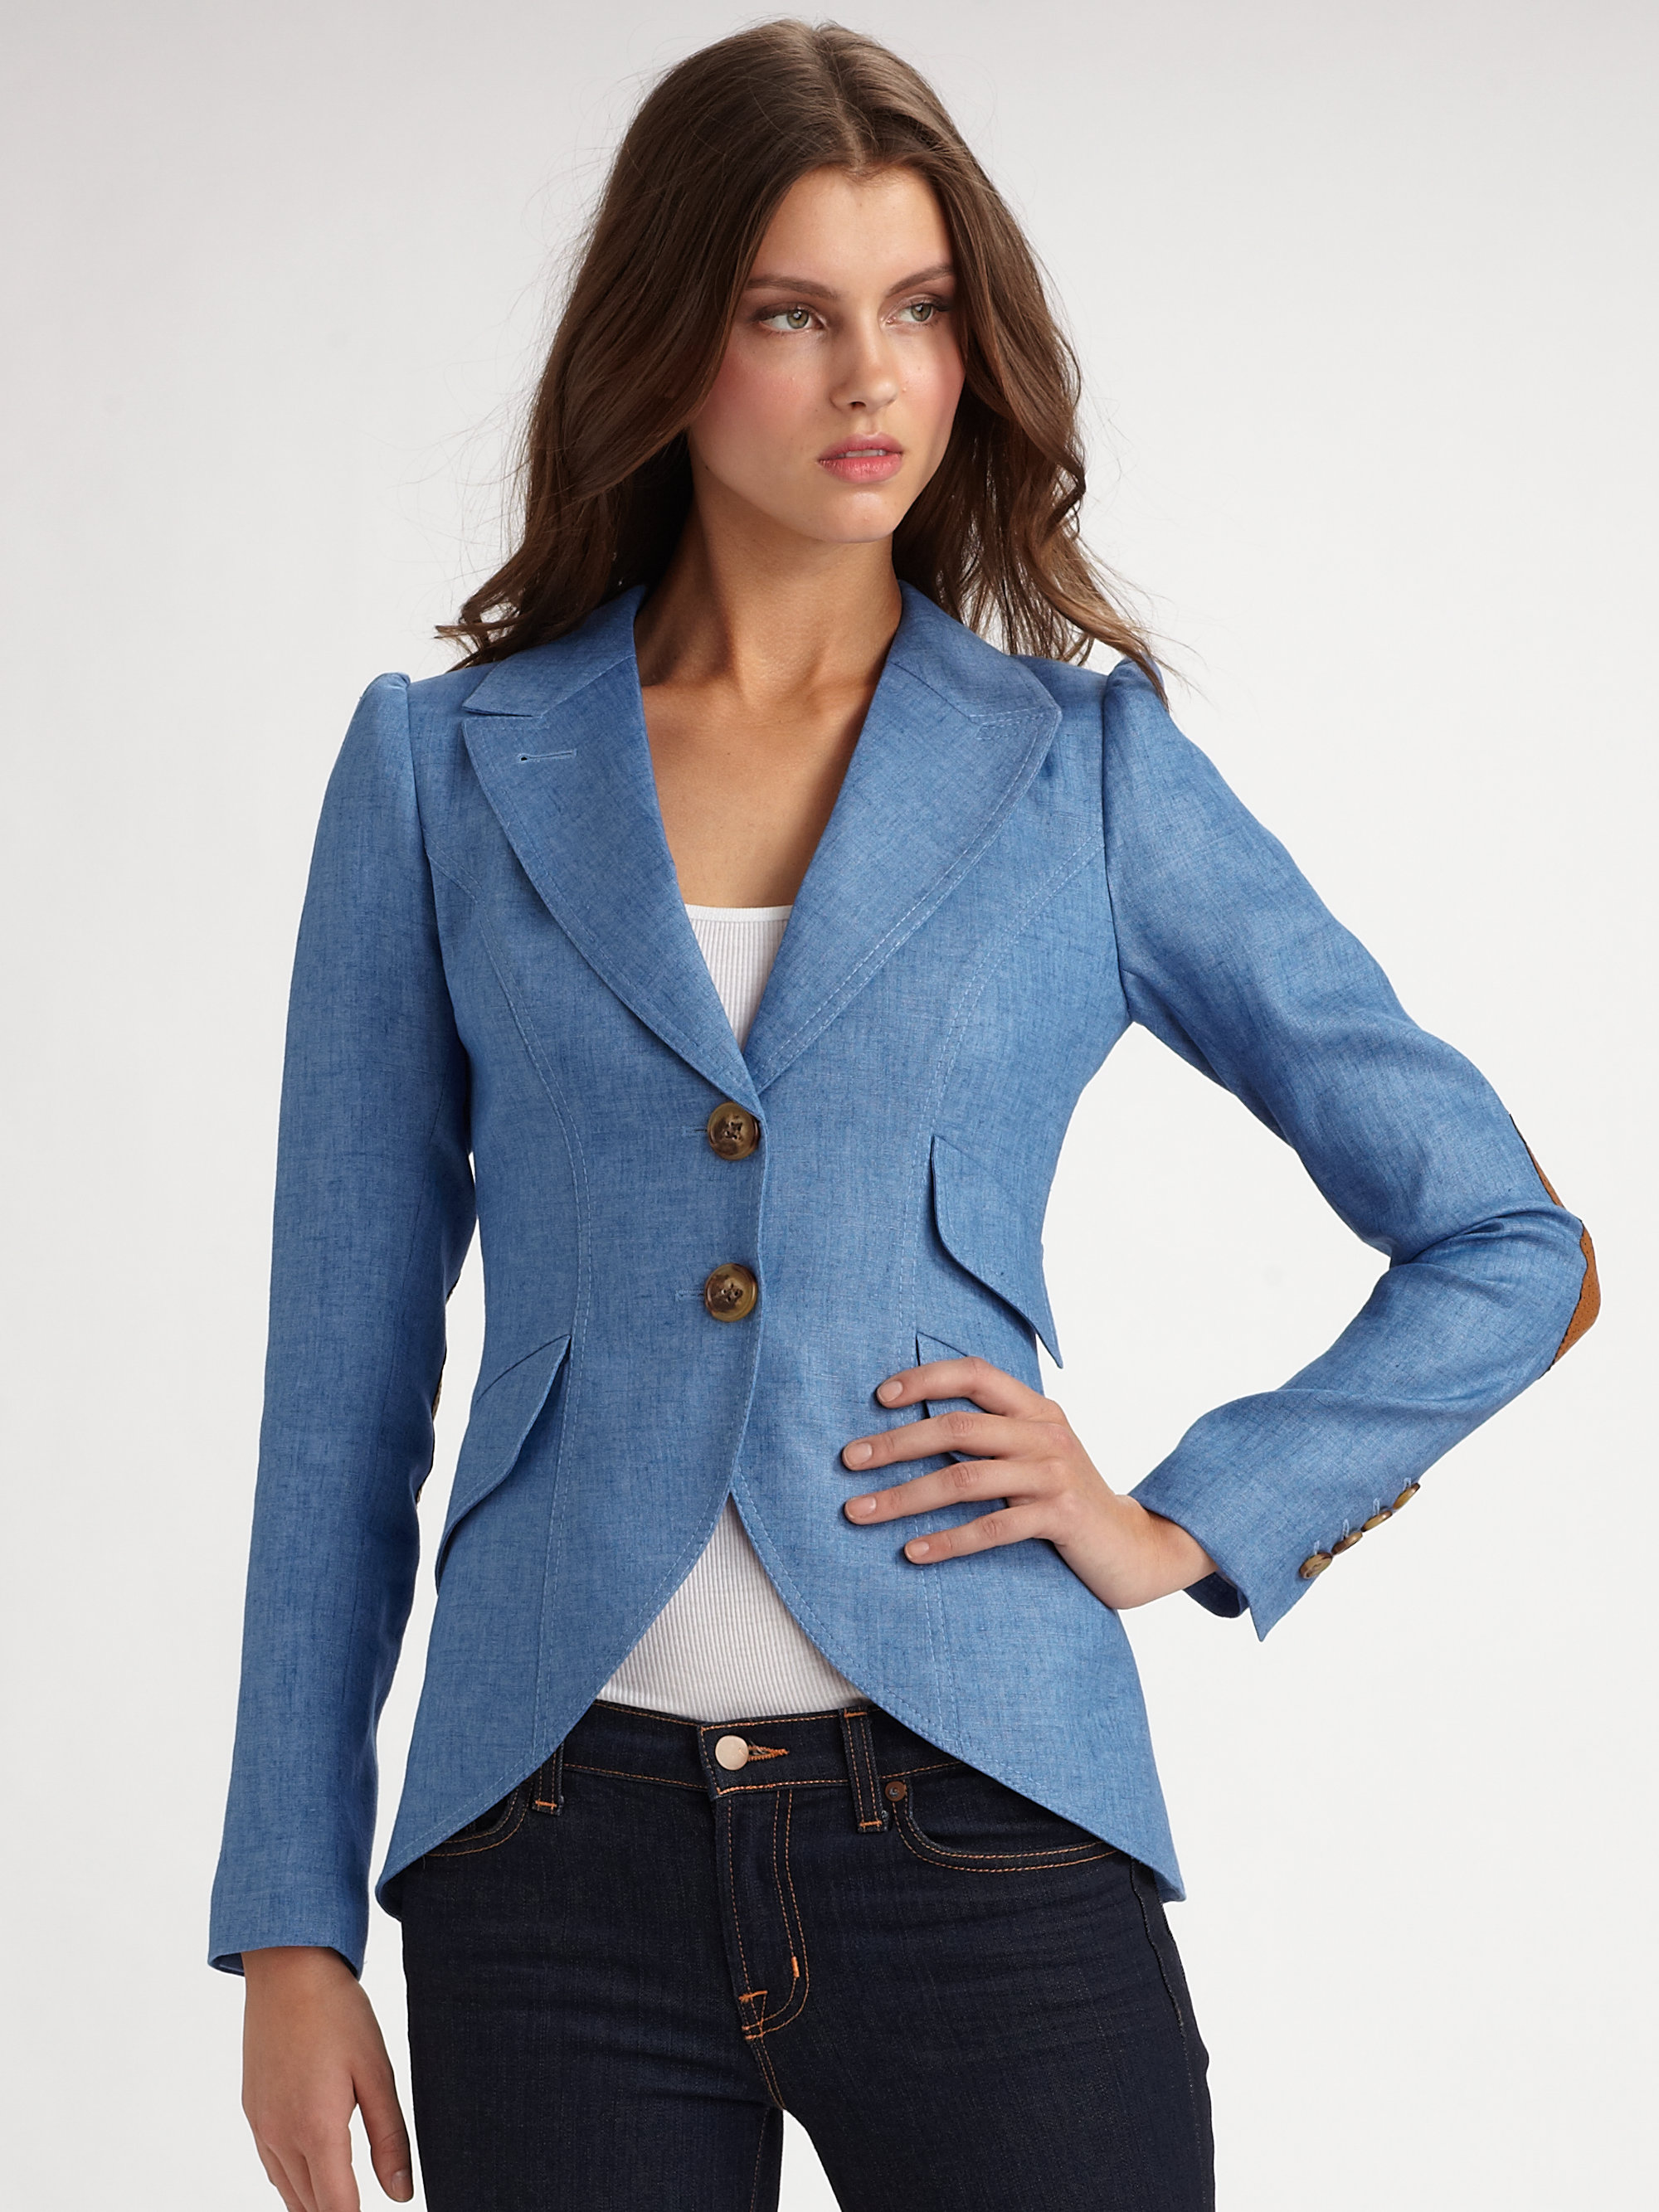 Lyst - Smythe Equesterian Jacket in Blue